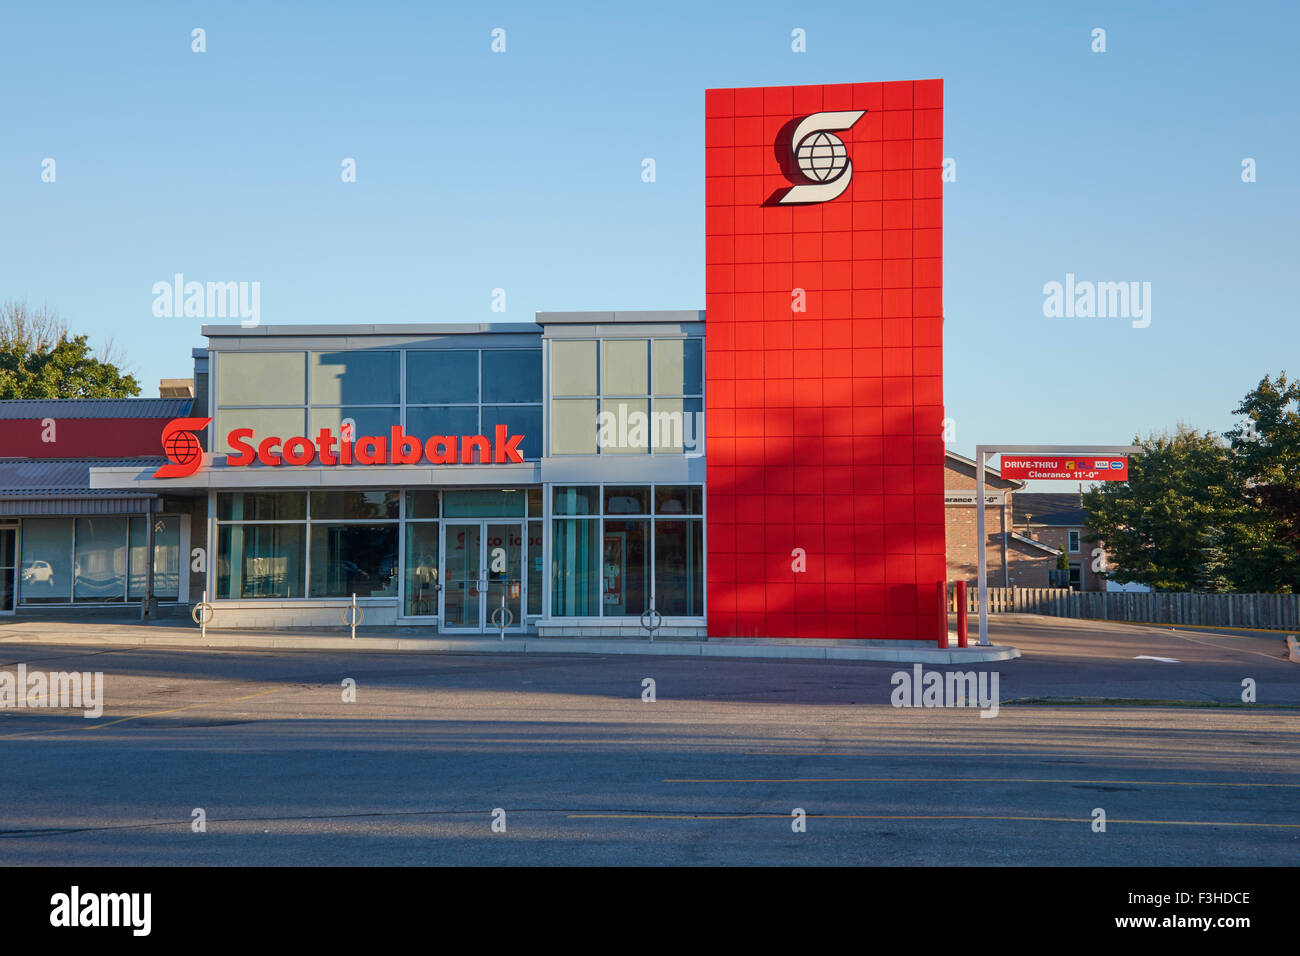 A New Modern Bank Branch Of Scotiabank In Woodstock Ontario, Scotiabank Is The Trading Name For The Bank Of Nova Scotia. Stock Photo